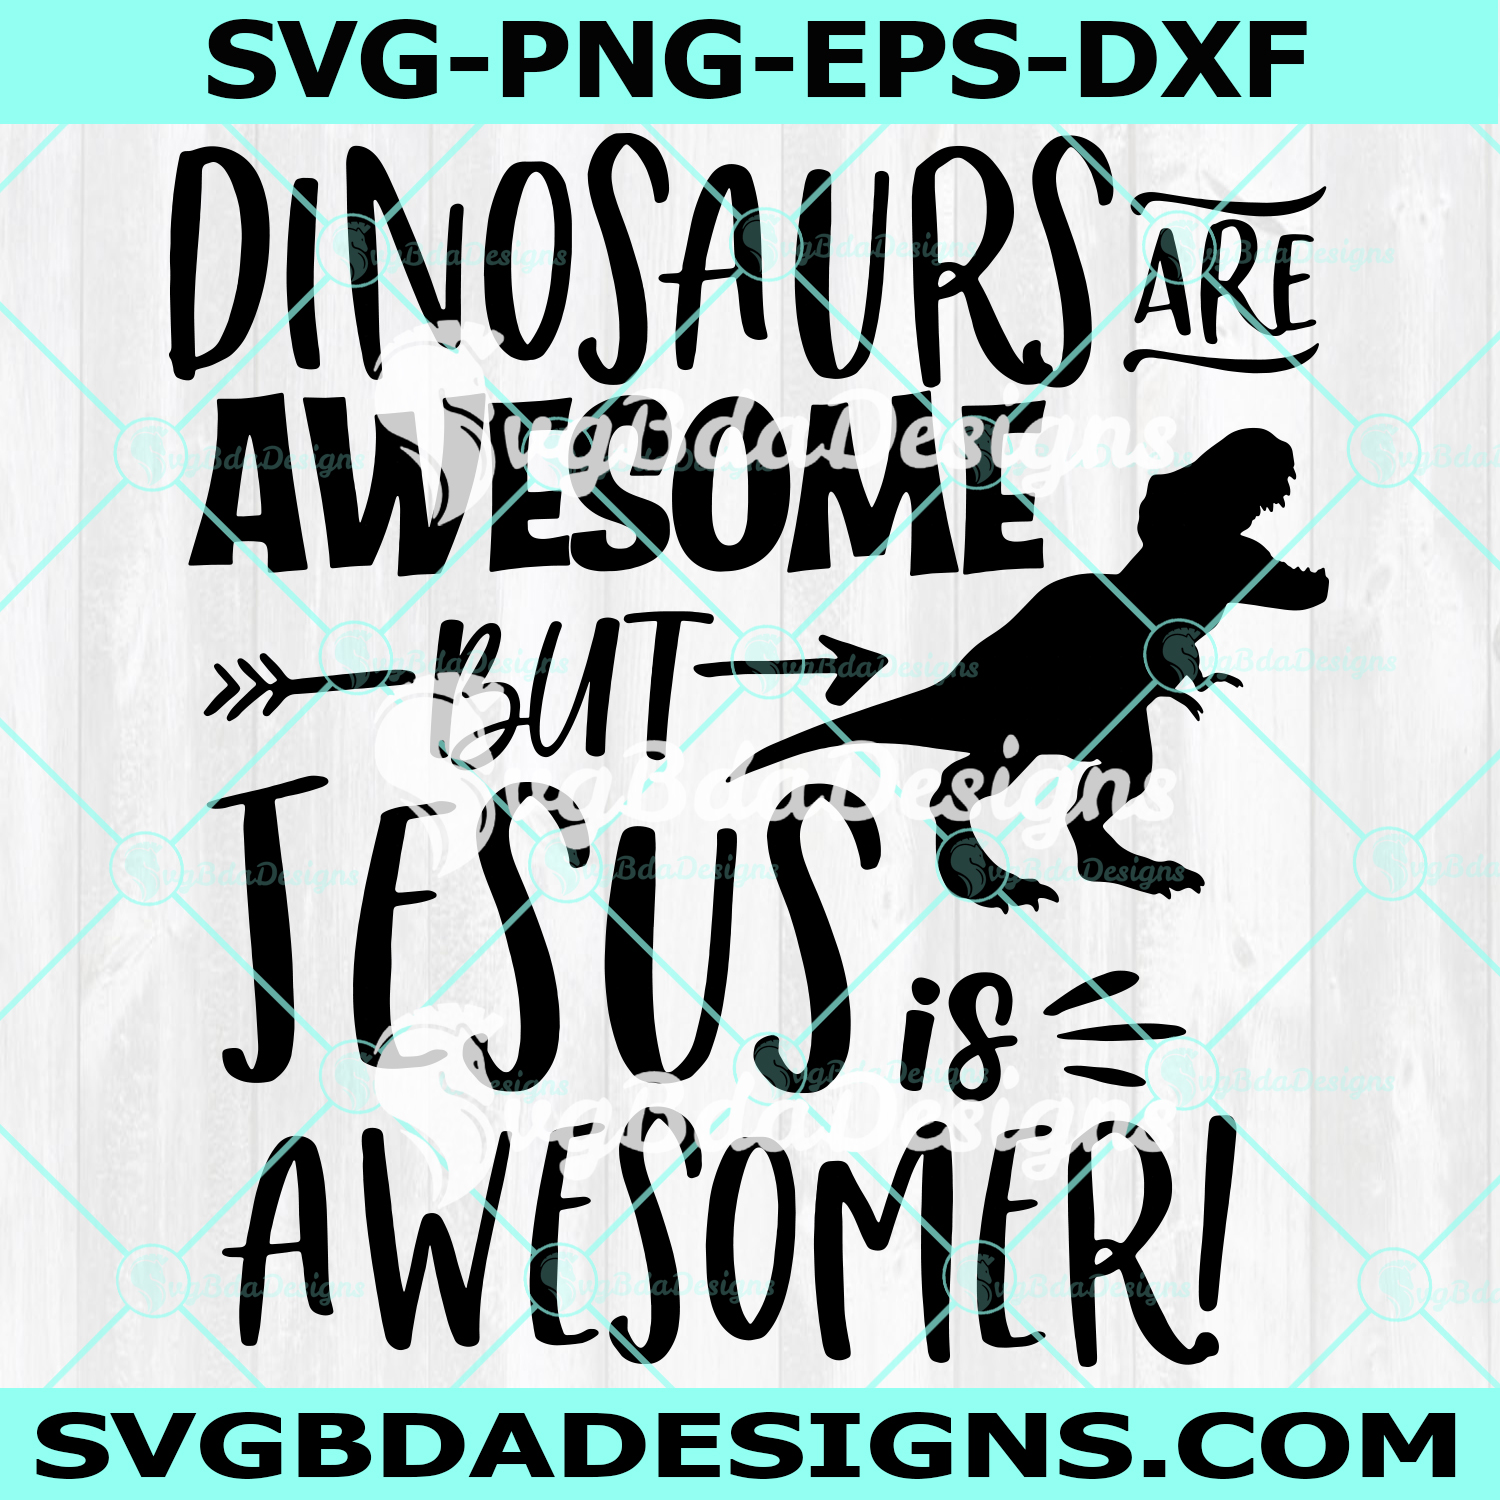 Dinosaurs are awesome but Jesus is awesomer Svg, Funny Kids Dinosaur Jesus Svg, Jesus Svg, Christian Dinosaur Lover Svg ,Digital Download